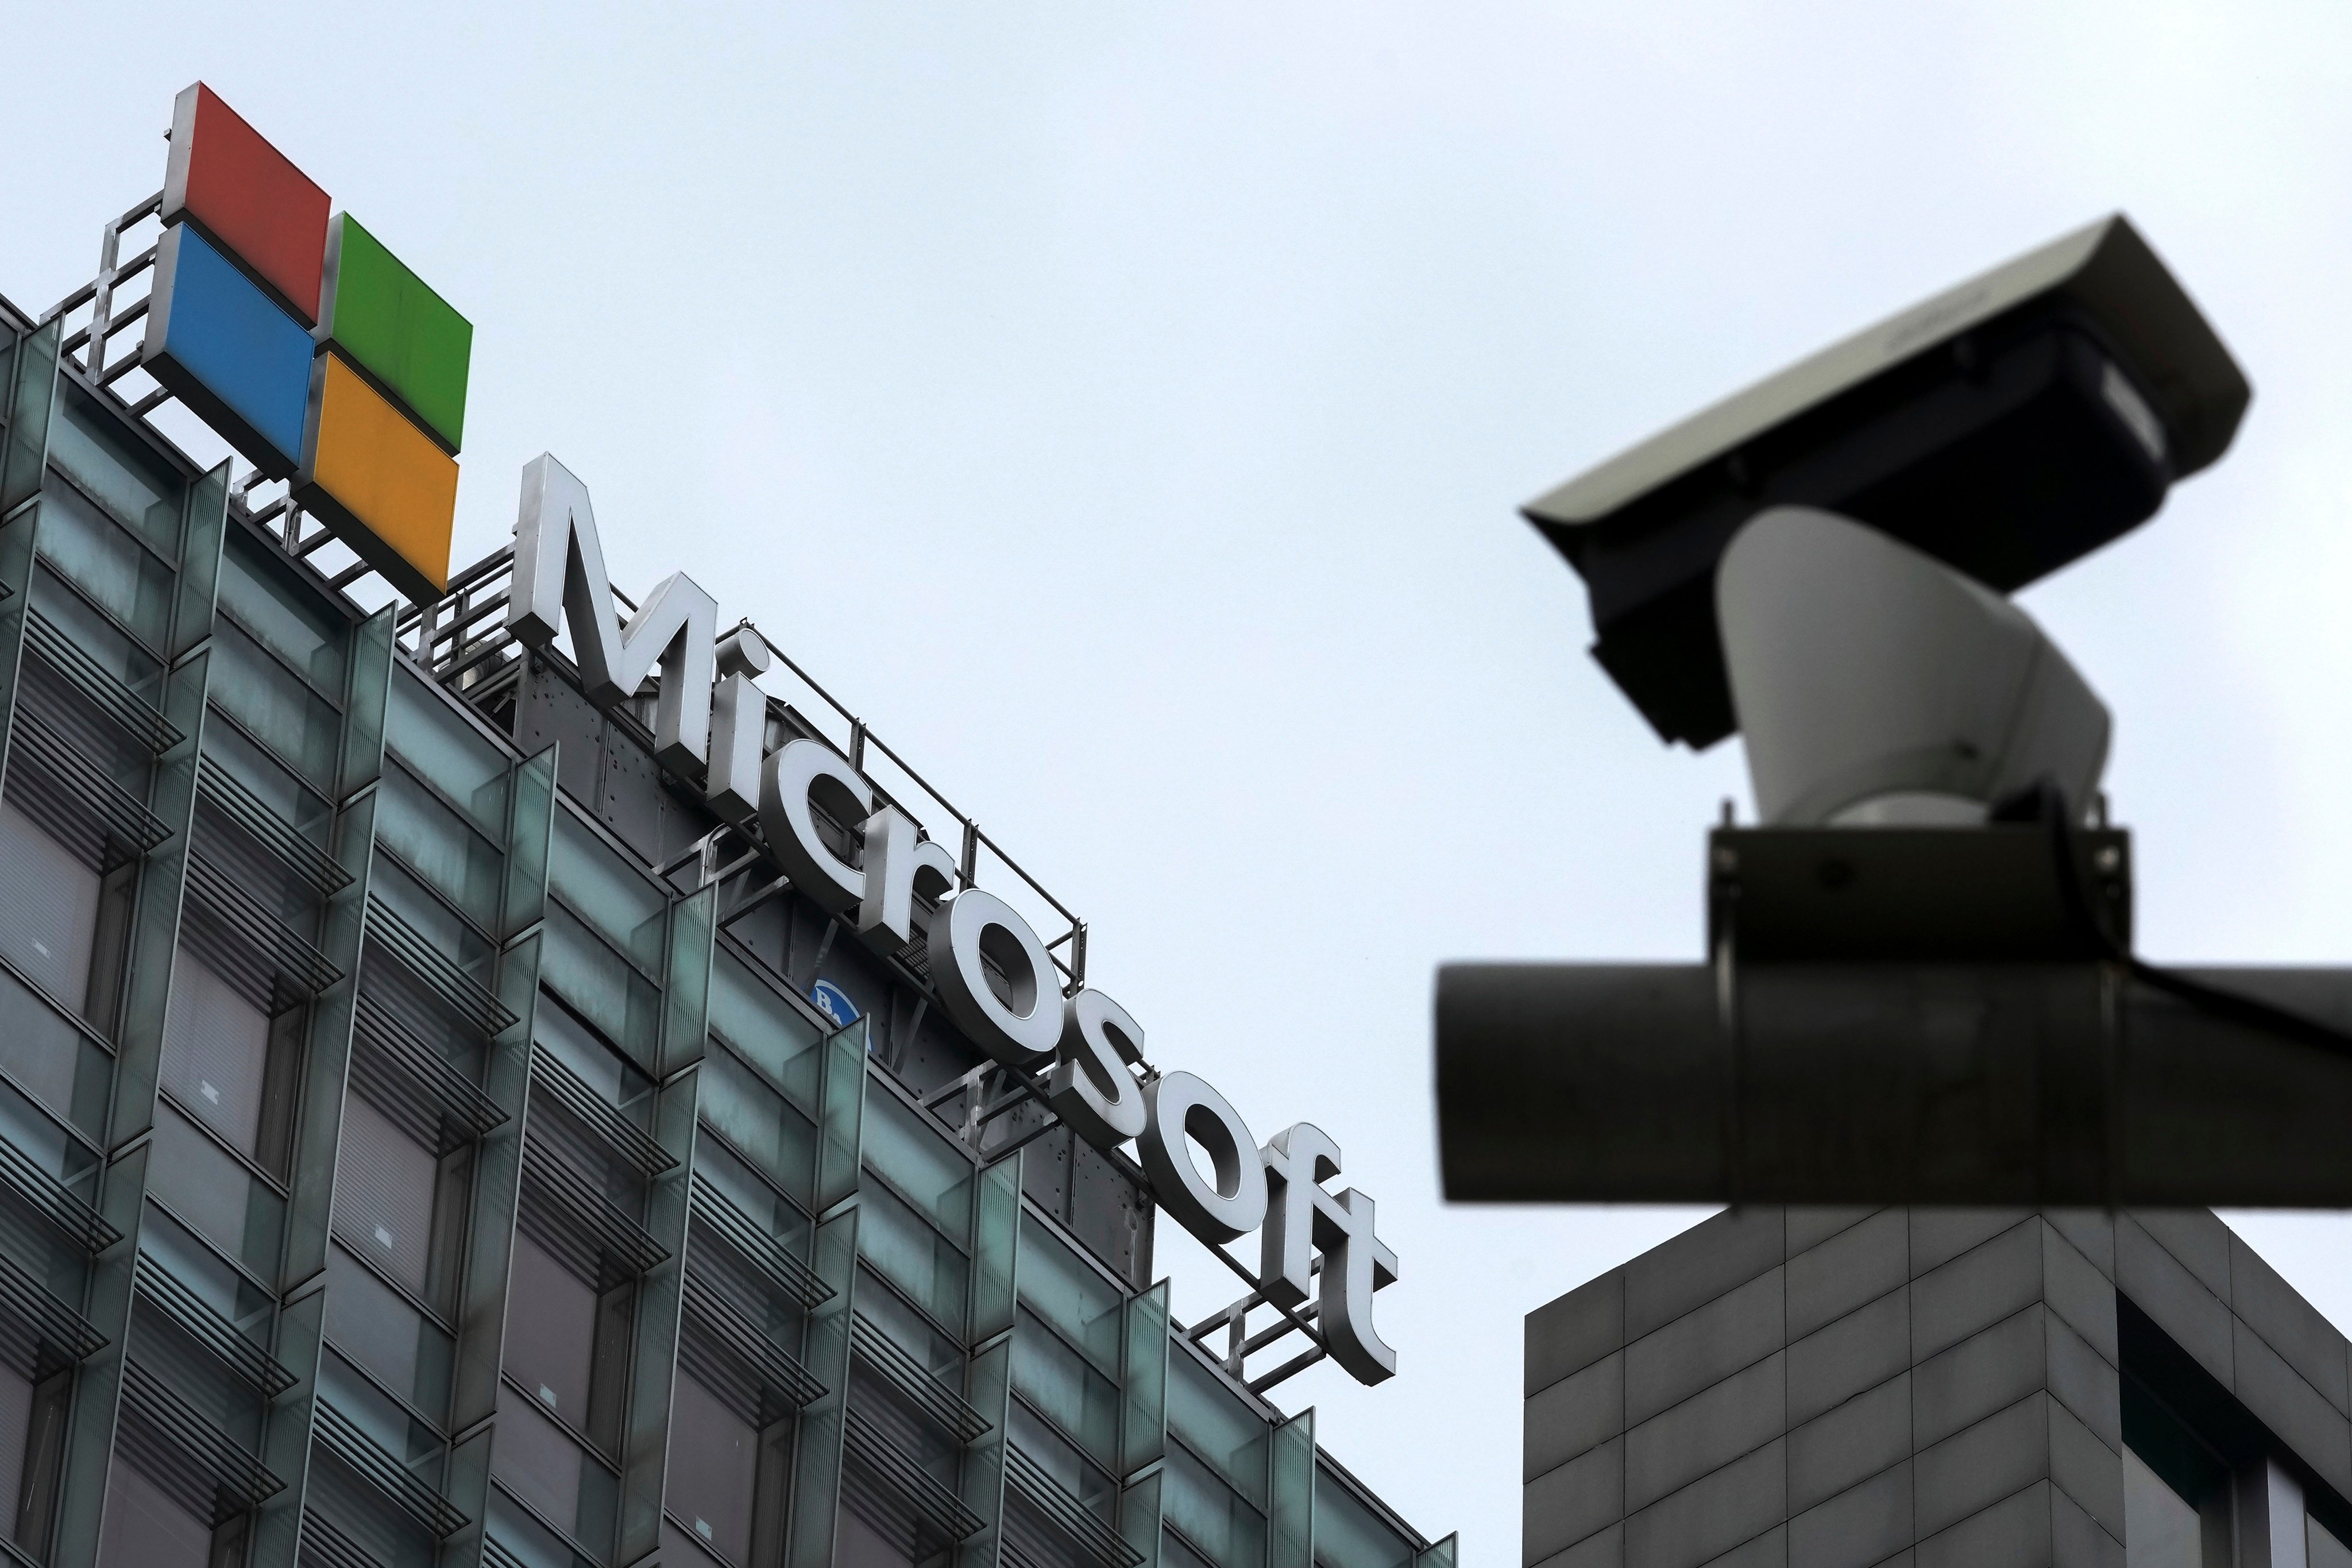 A surveillance camera seen near the Microsoft office building in Beijing on July 20, 2021. Photo: AP